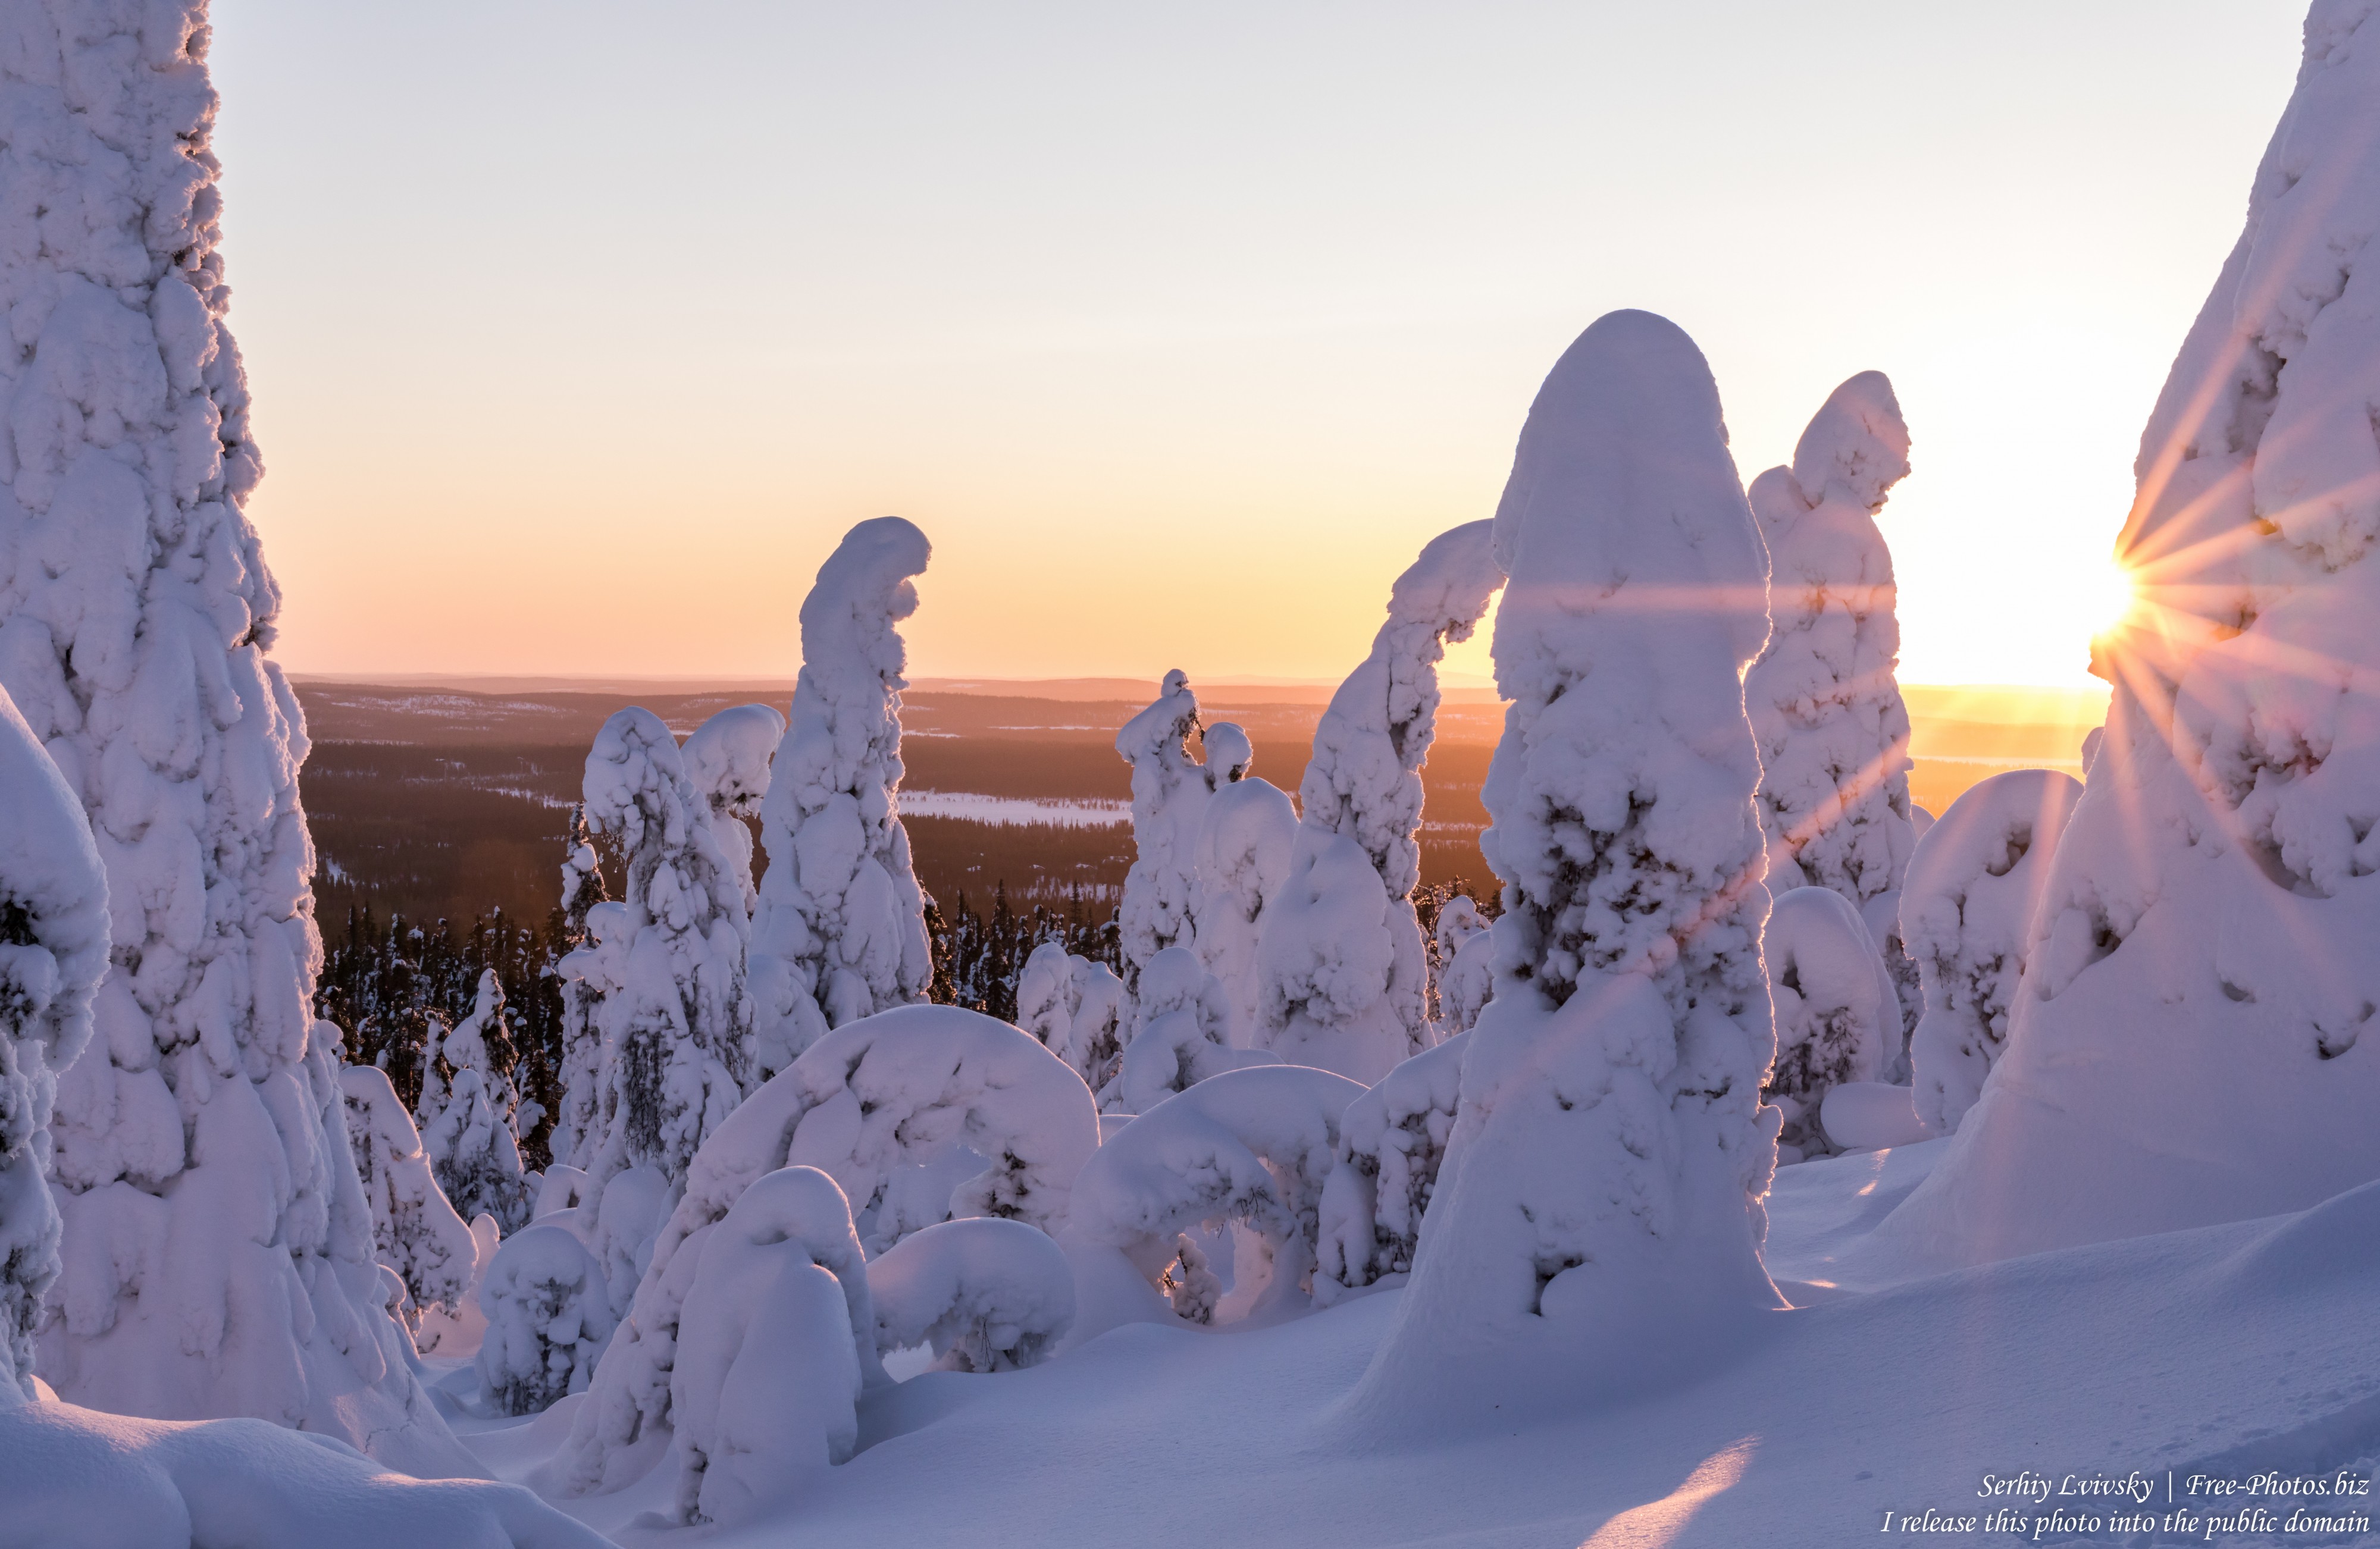 Valtavaara, Finland, photographed in January 2020 by Serhiy Lvivsky, picture 33